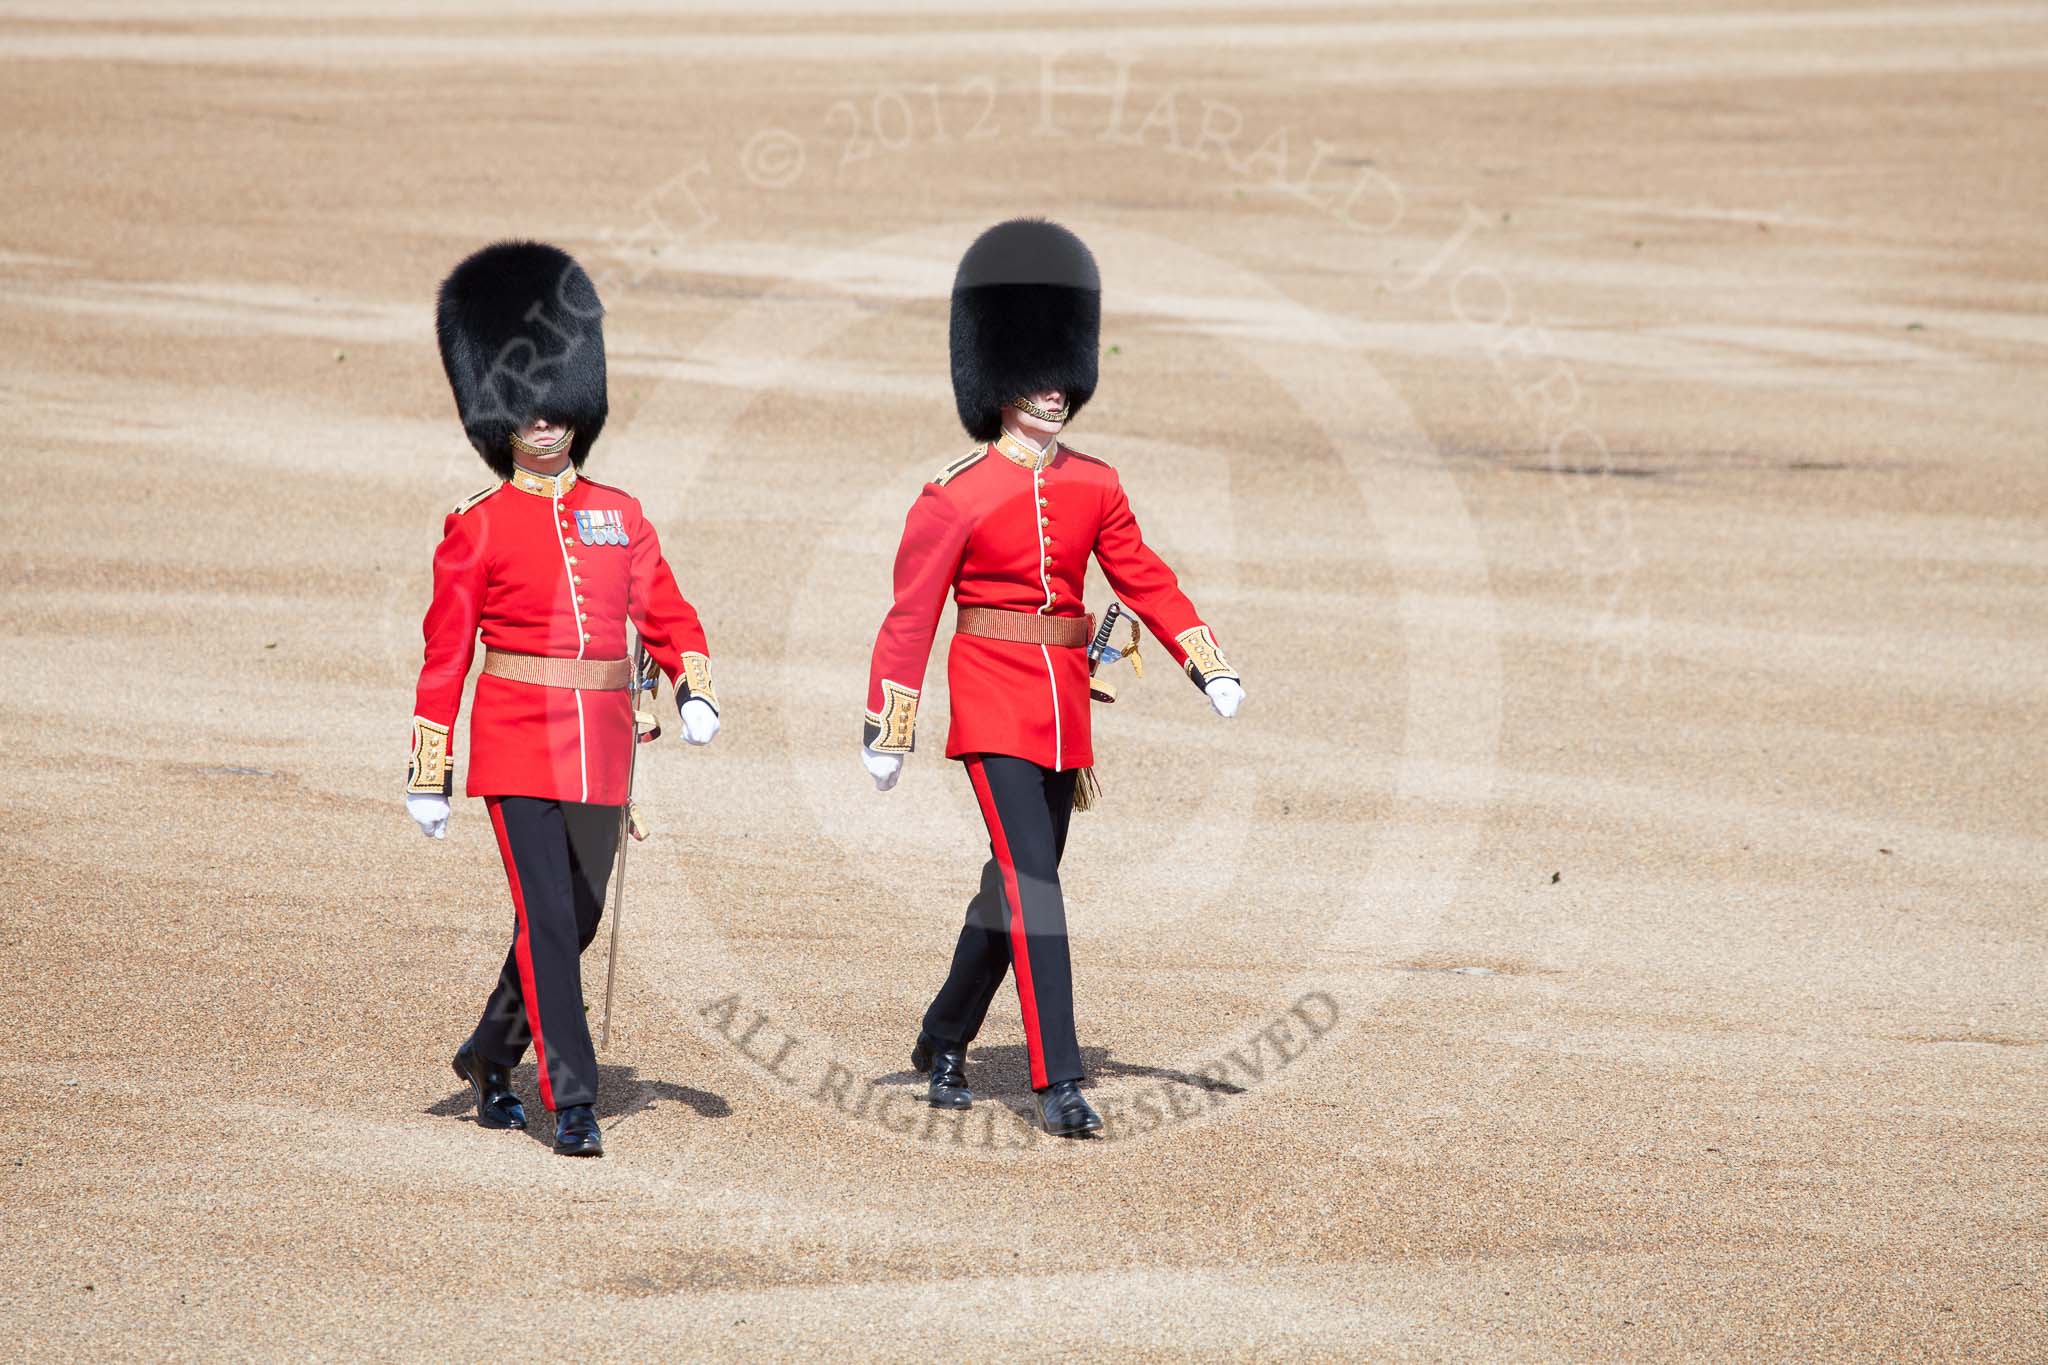 Trooping the Colour 2012: The first to cross Horse Guards Parade - two Majors of the Grenadier Guards..
Horse Guards Parade, Westminster,
London SW1,

United Kingdom,
on 16 June 2012 at 09:52, image #8